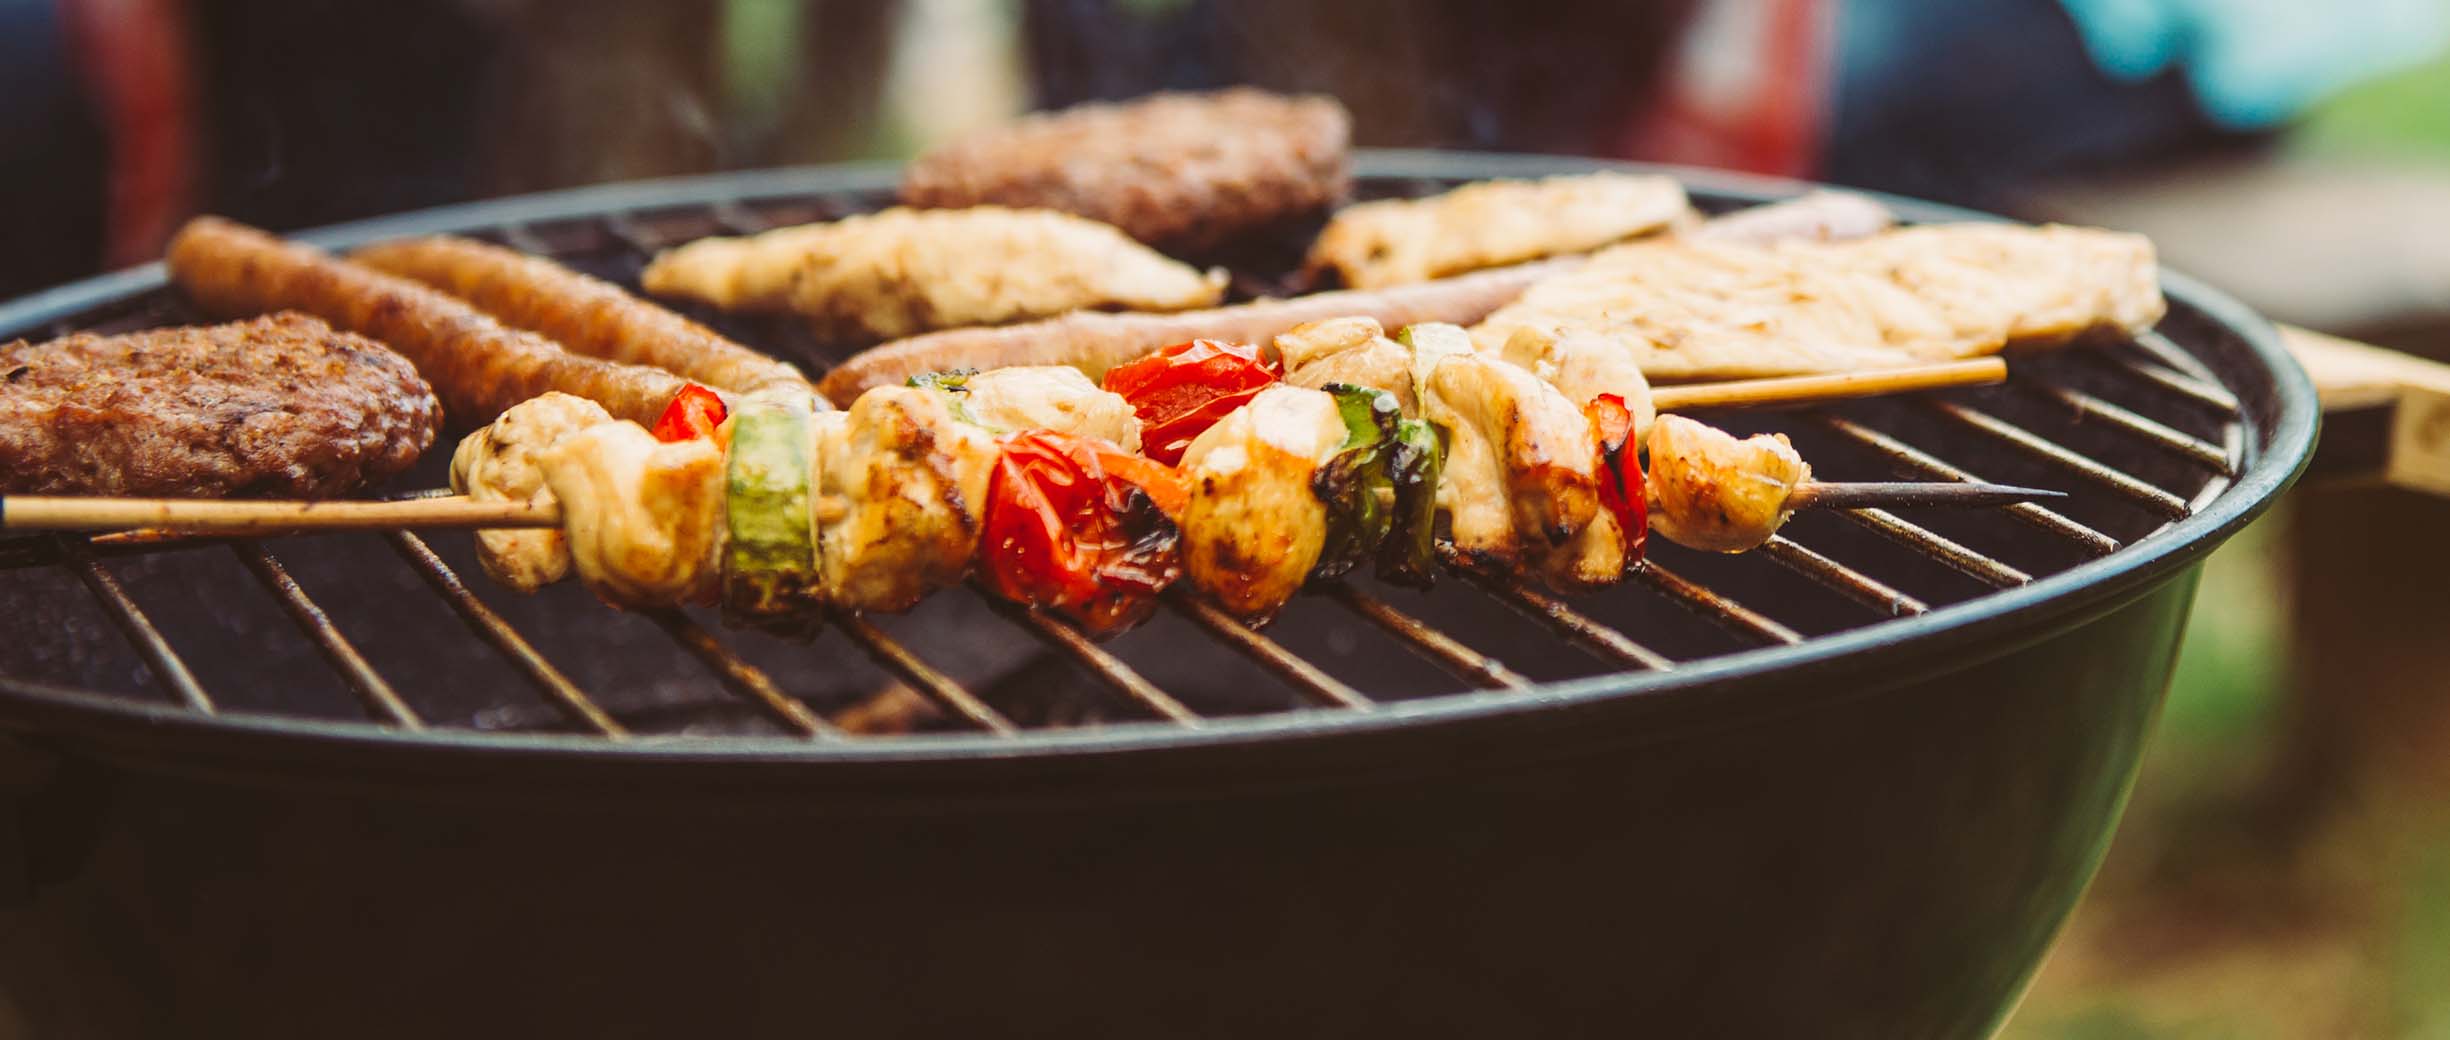 5 Hacks for a Healthy BBQ on a Budget